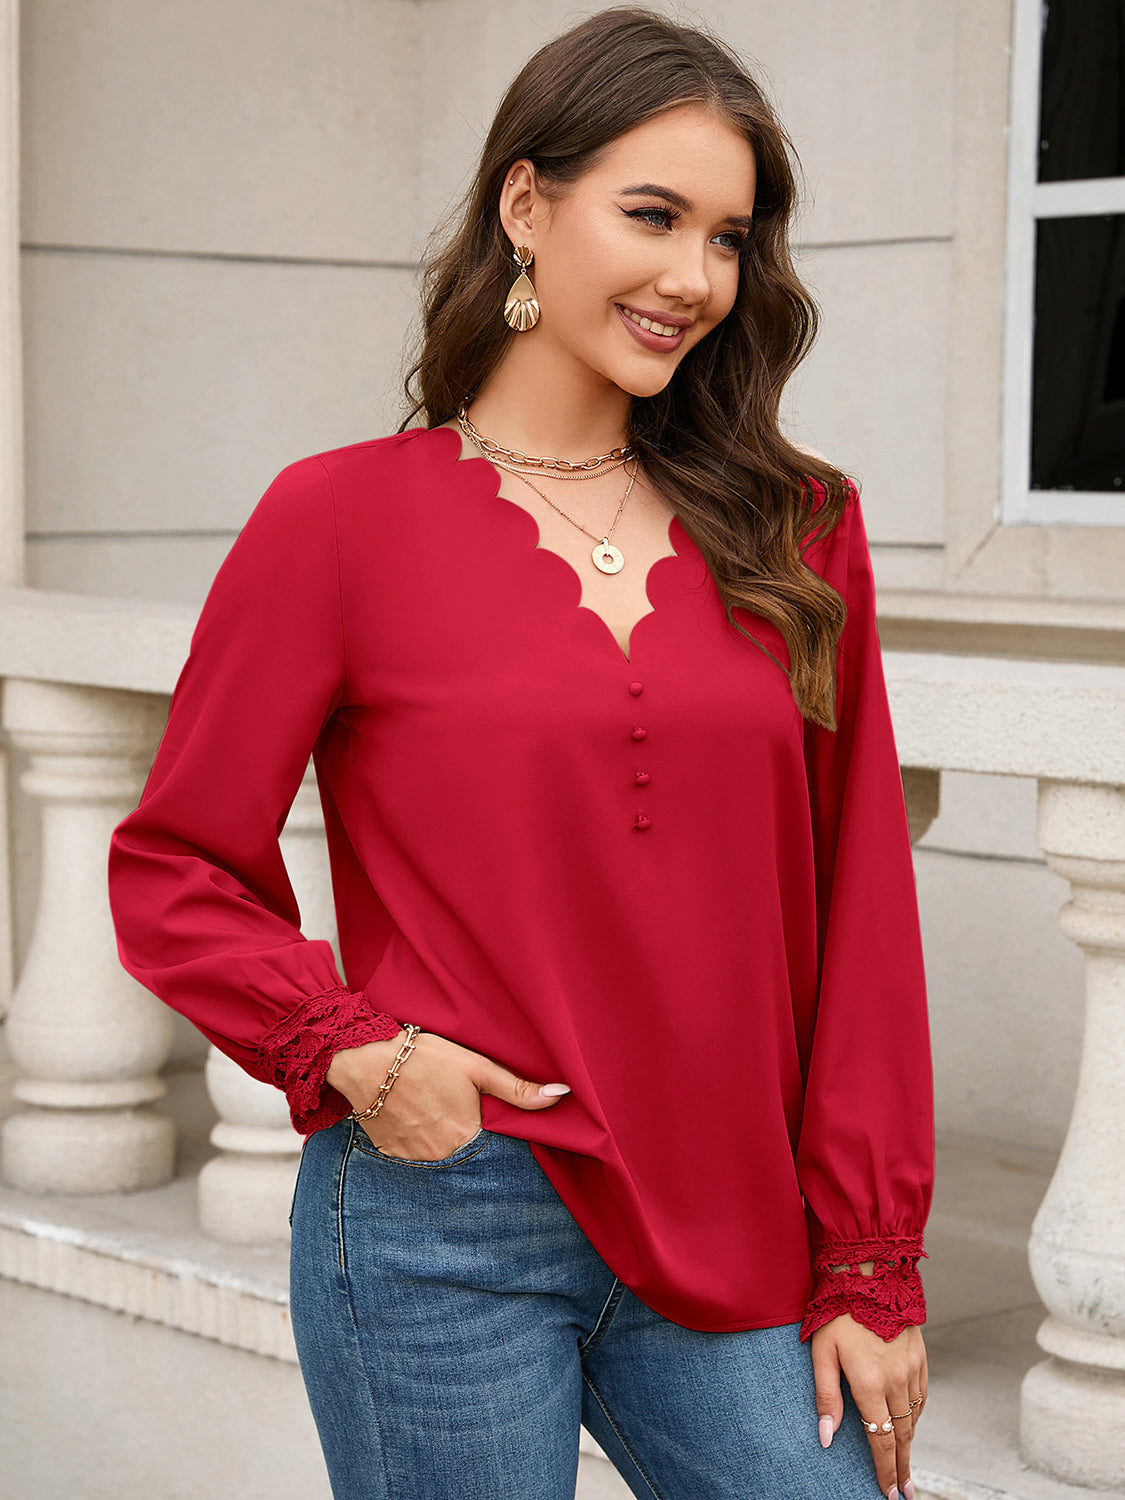 V-Neck Long Sleeve Blouse - Women’s Clothing & Accessories - Shirts & Tops - 6 - 2024